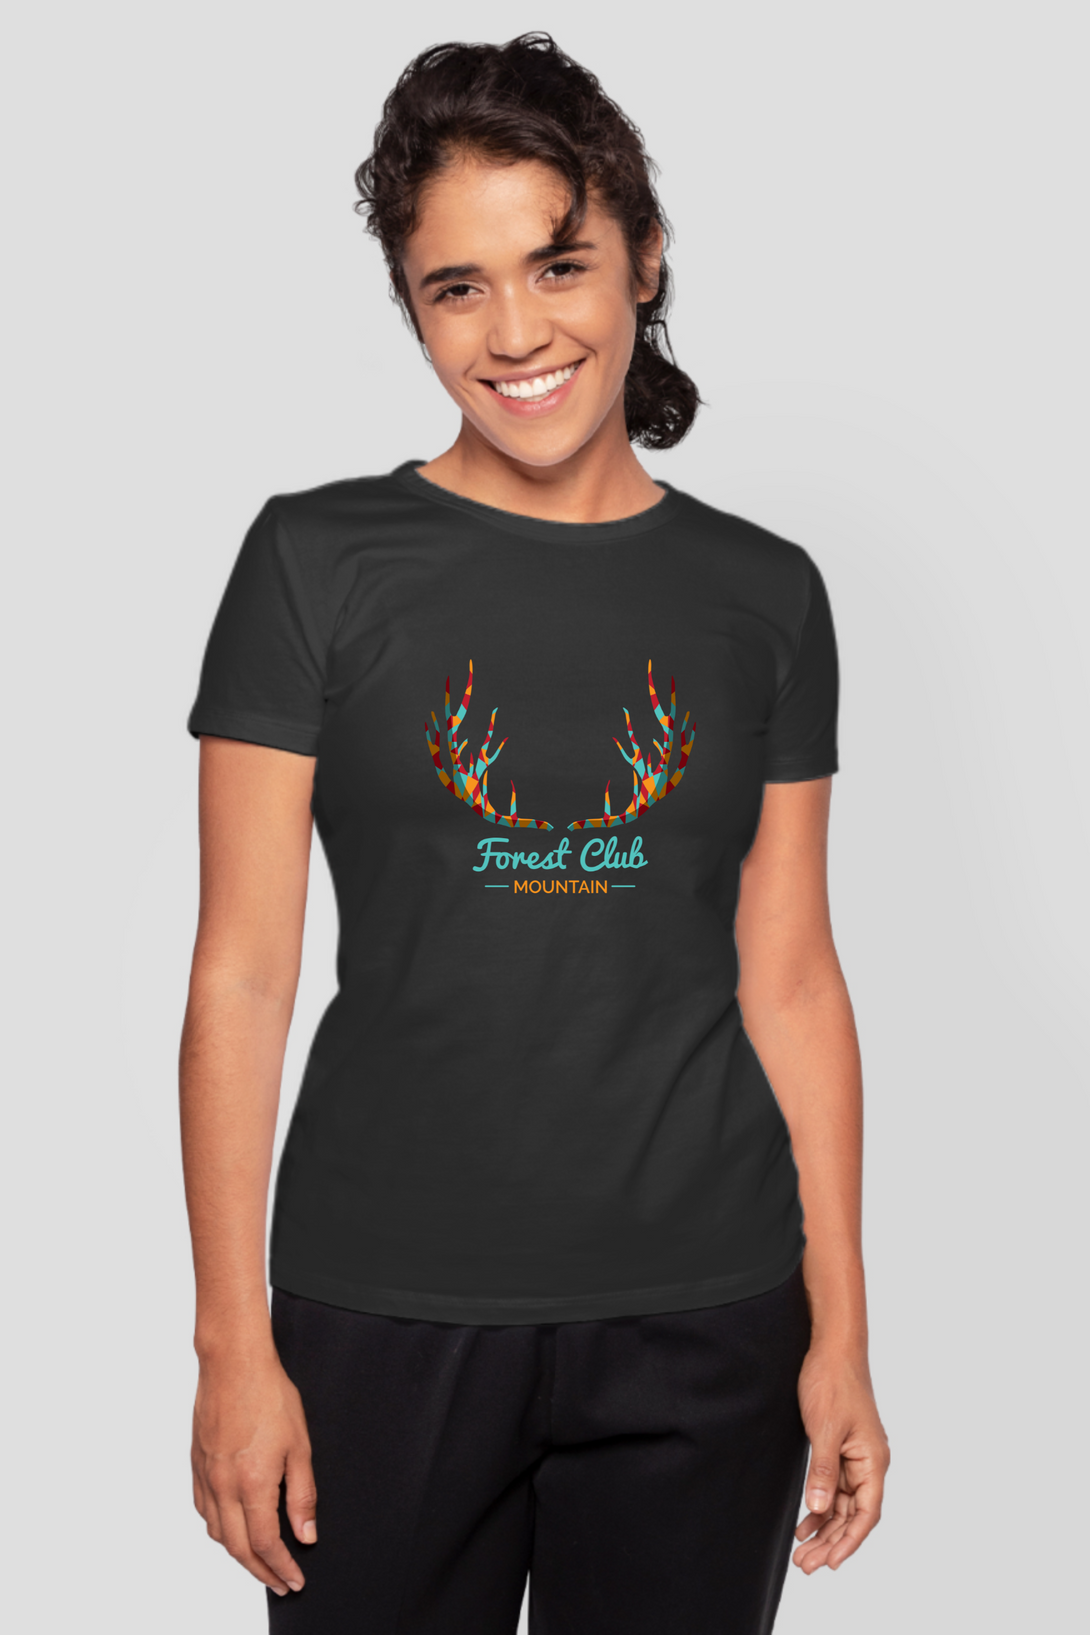 Forest Club Printed T-Shirt For Women - WowWaves - 11